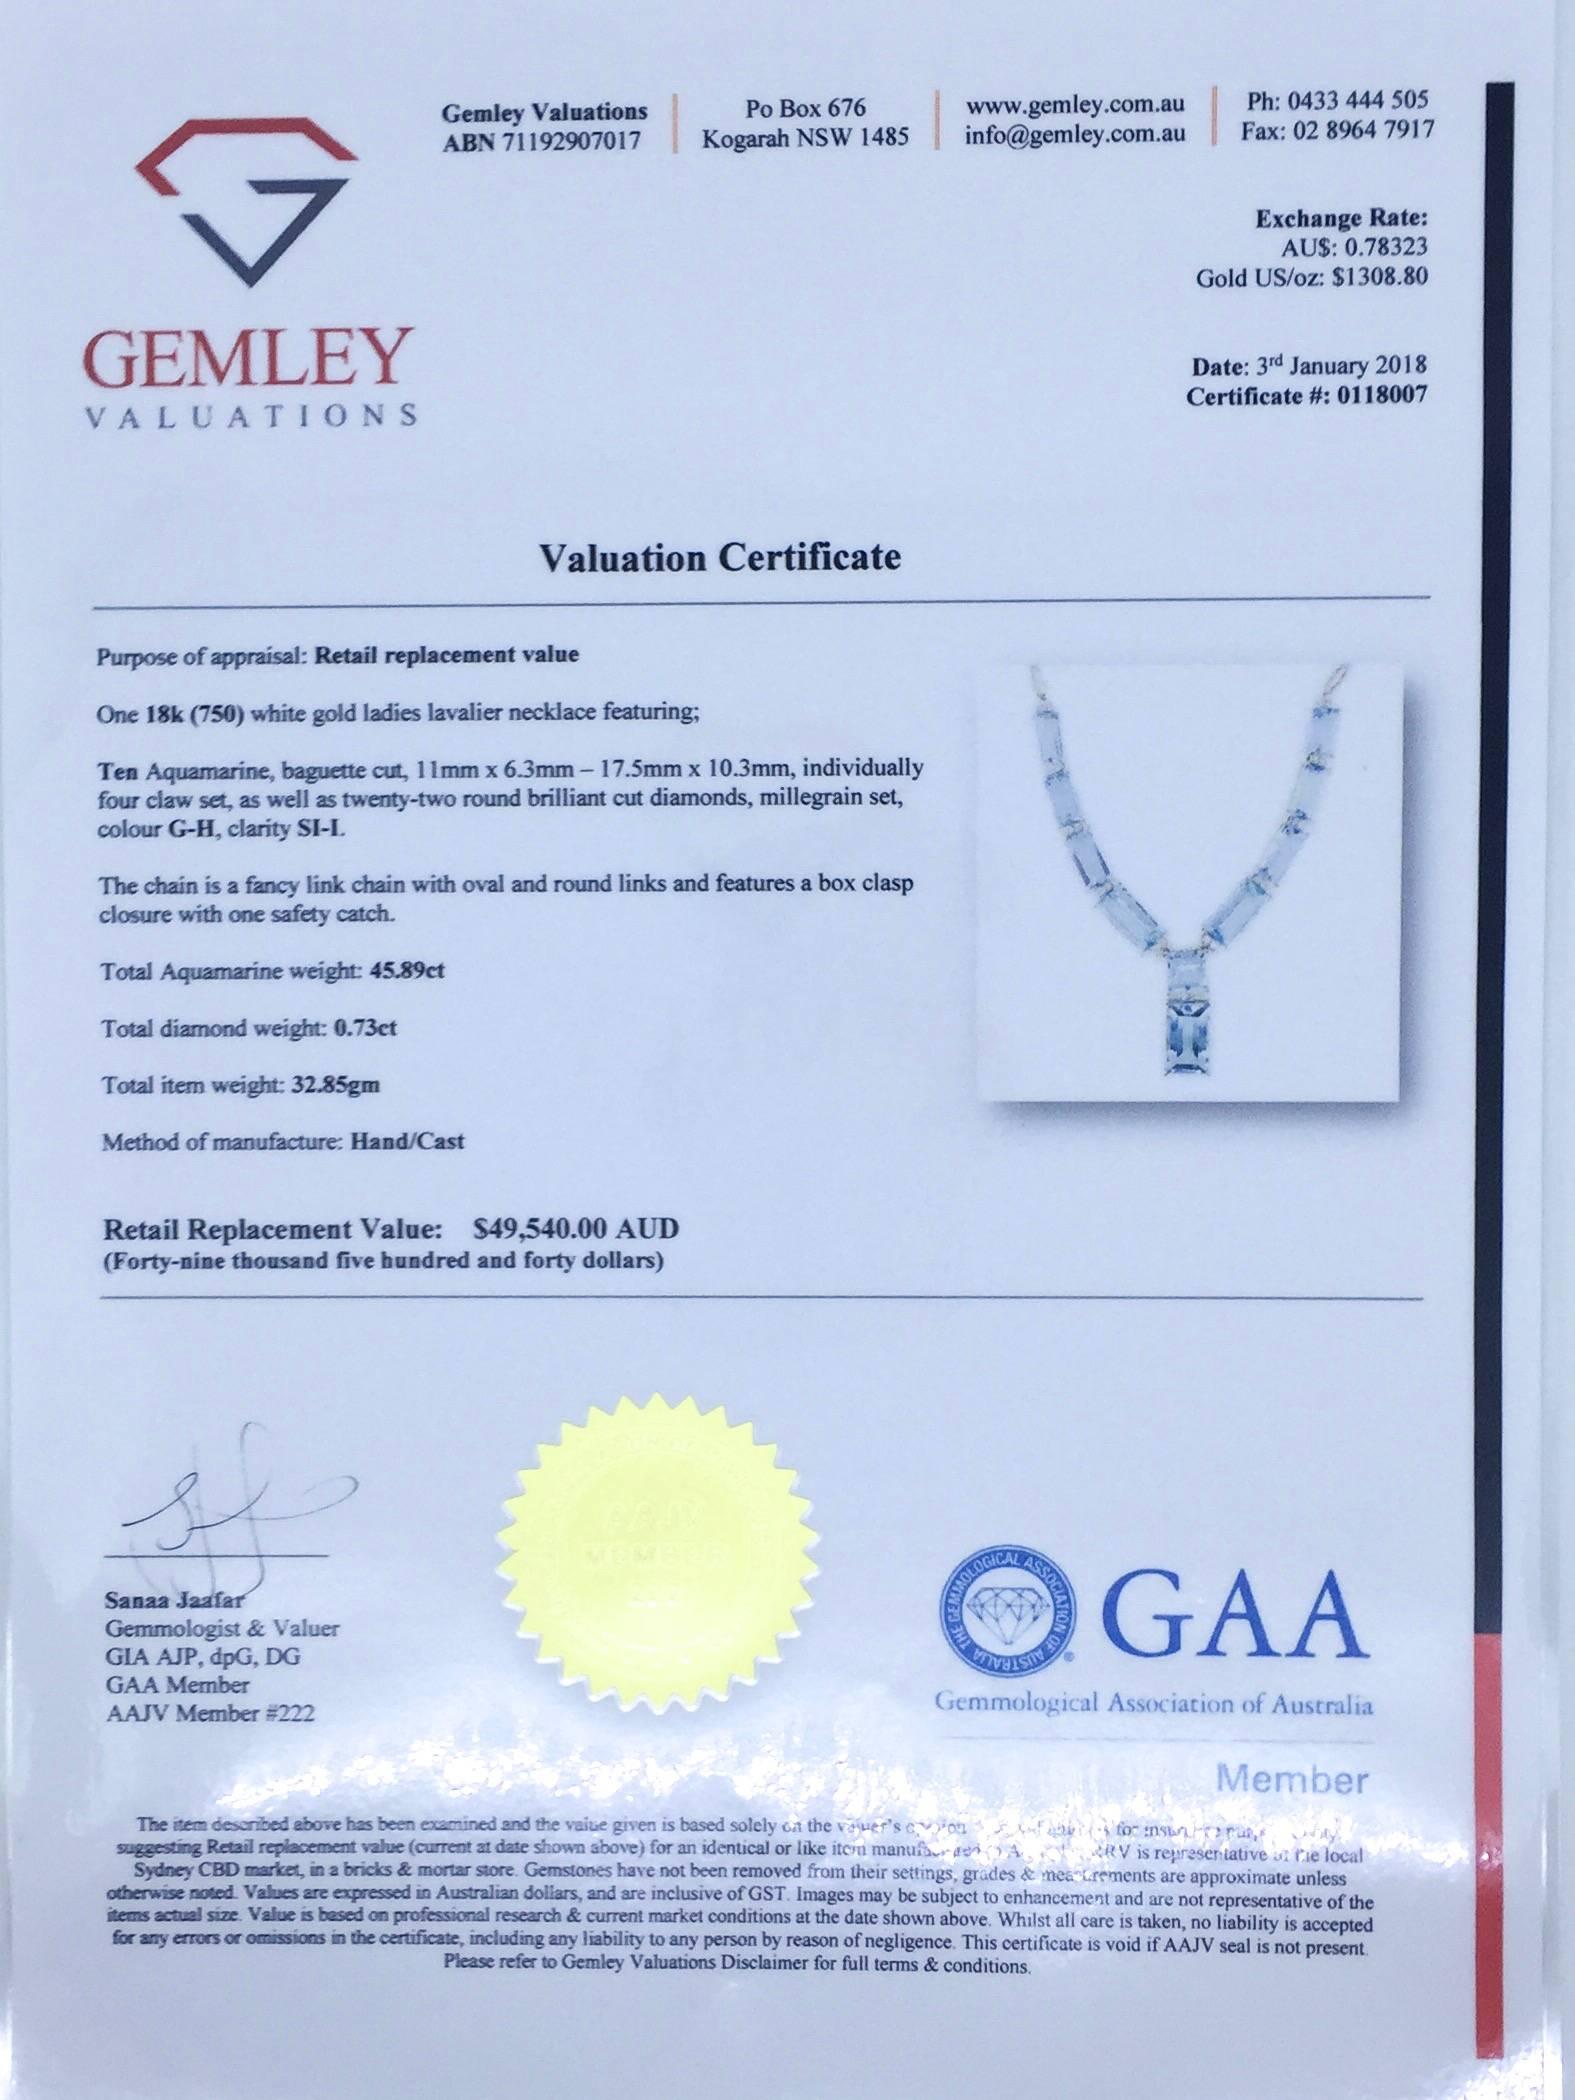 Aquamarine and Diamond Necklace by Cartmer Jewellery
Valuation Certificate $49,540 AUD

AN AQUAMARINE AND DIAMOND NECKLACE 
Comprising ten emerald cut aquamarines totalling 45.89cts, spaced by round brilliant cut diamonds totalling 0.73cts, mounted